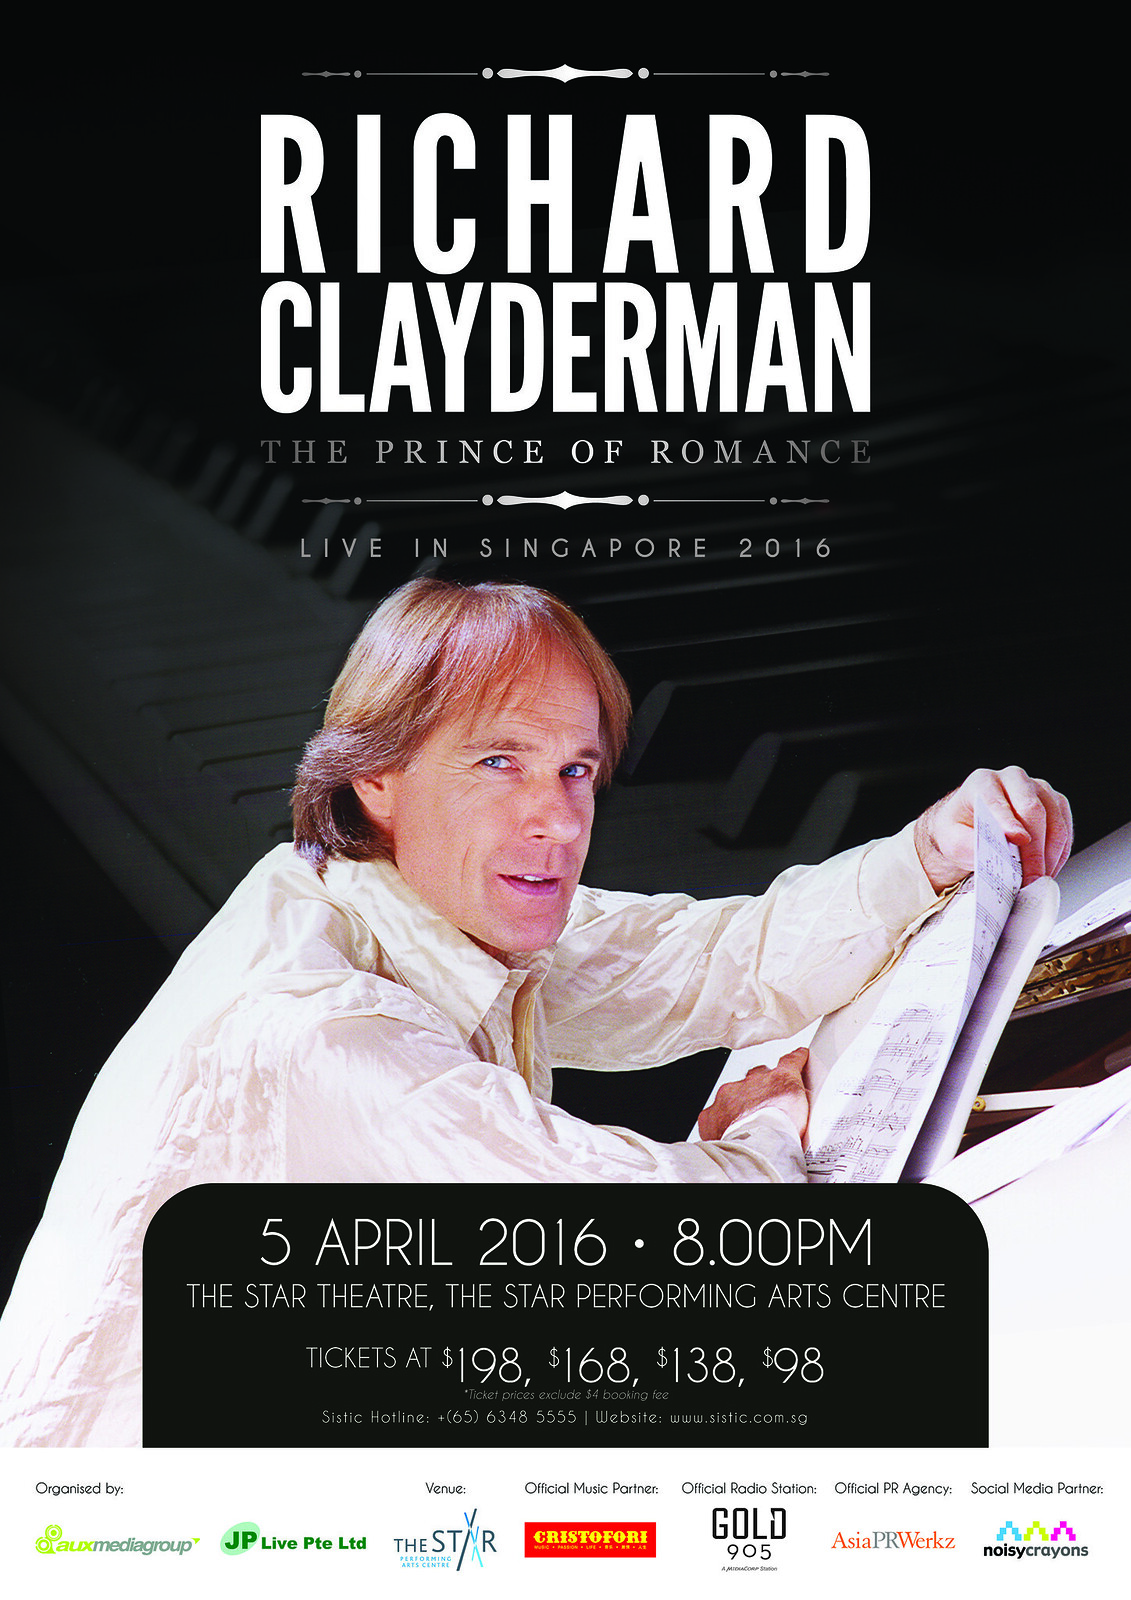 [GIVEAWAY] Richard Clayderman – The Prince of Romance Live in Singapore 2016 - Alvinology